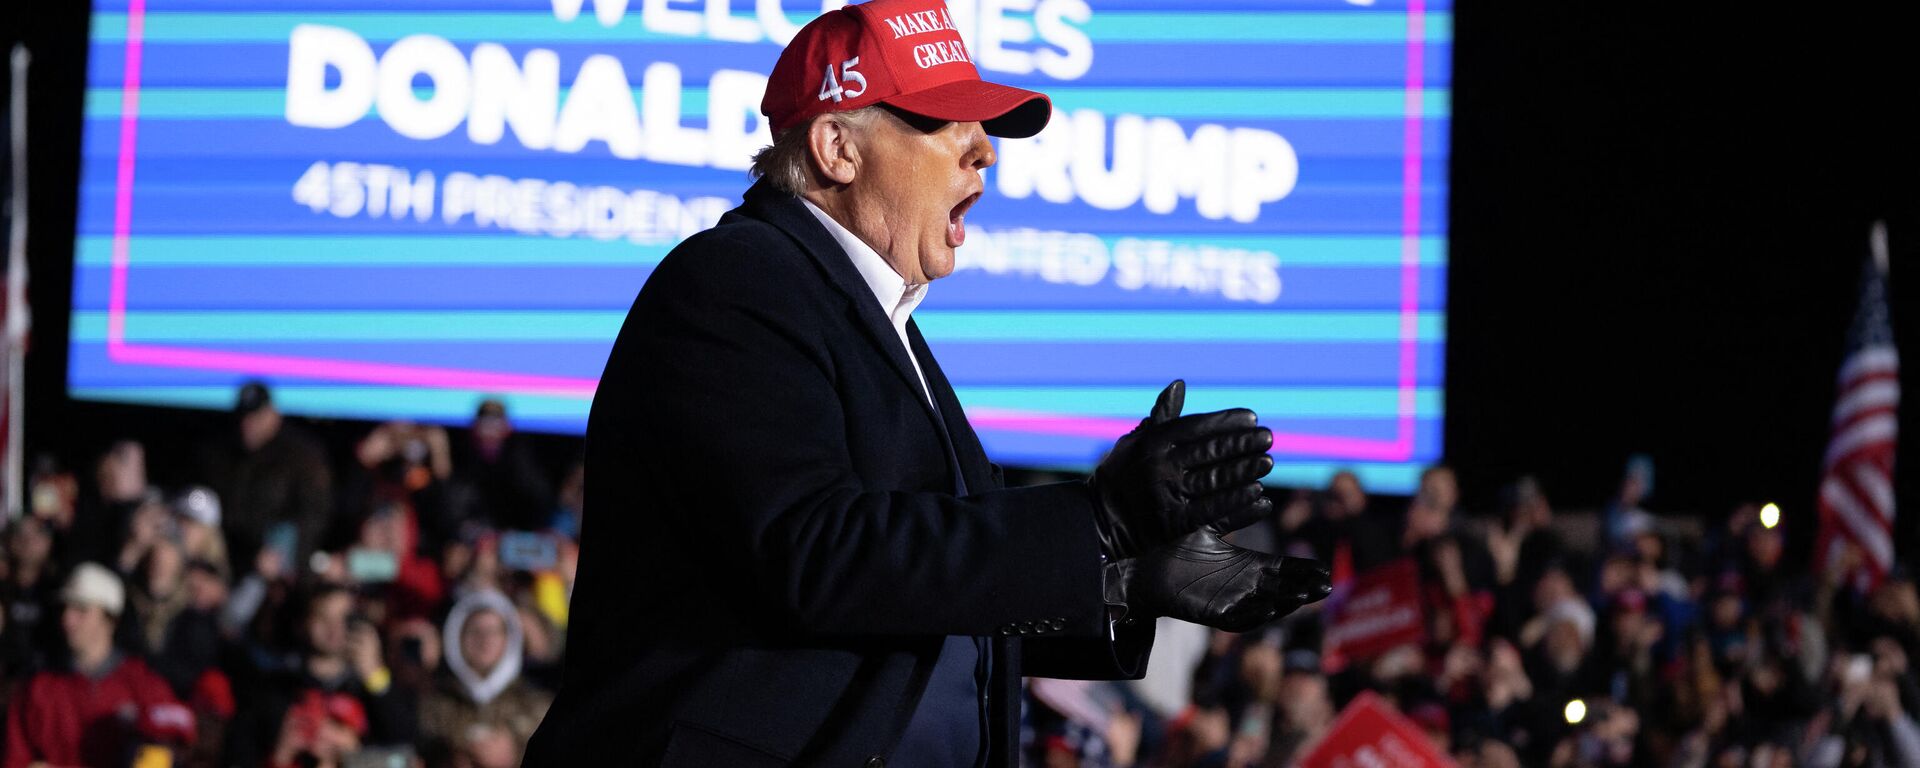 Former US President Donald Trump greets the crowd during a rally at the Florence Regional Airport on March 12, 2022 in Florence, South Carolina - Sputnik International, 1920, 13.03.2022